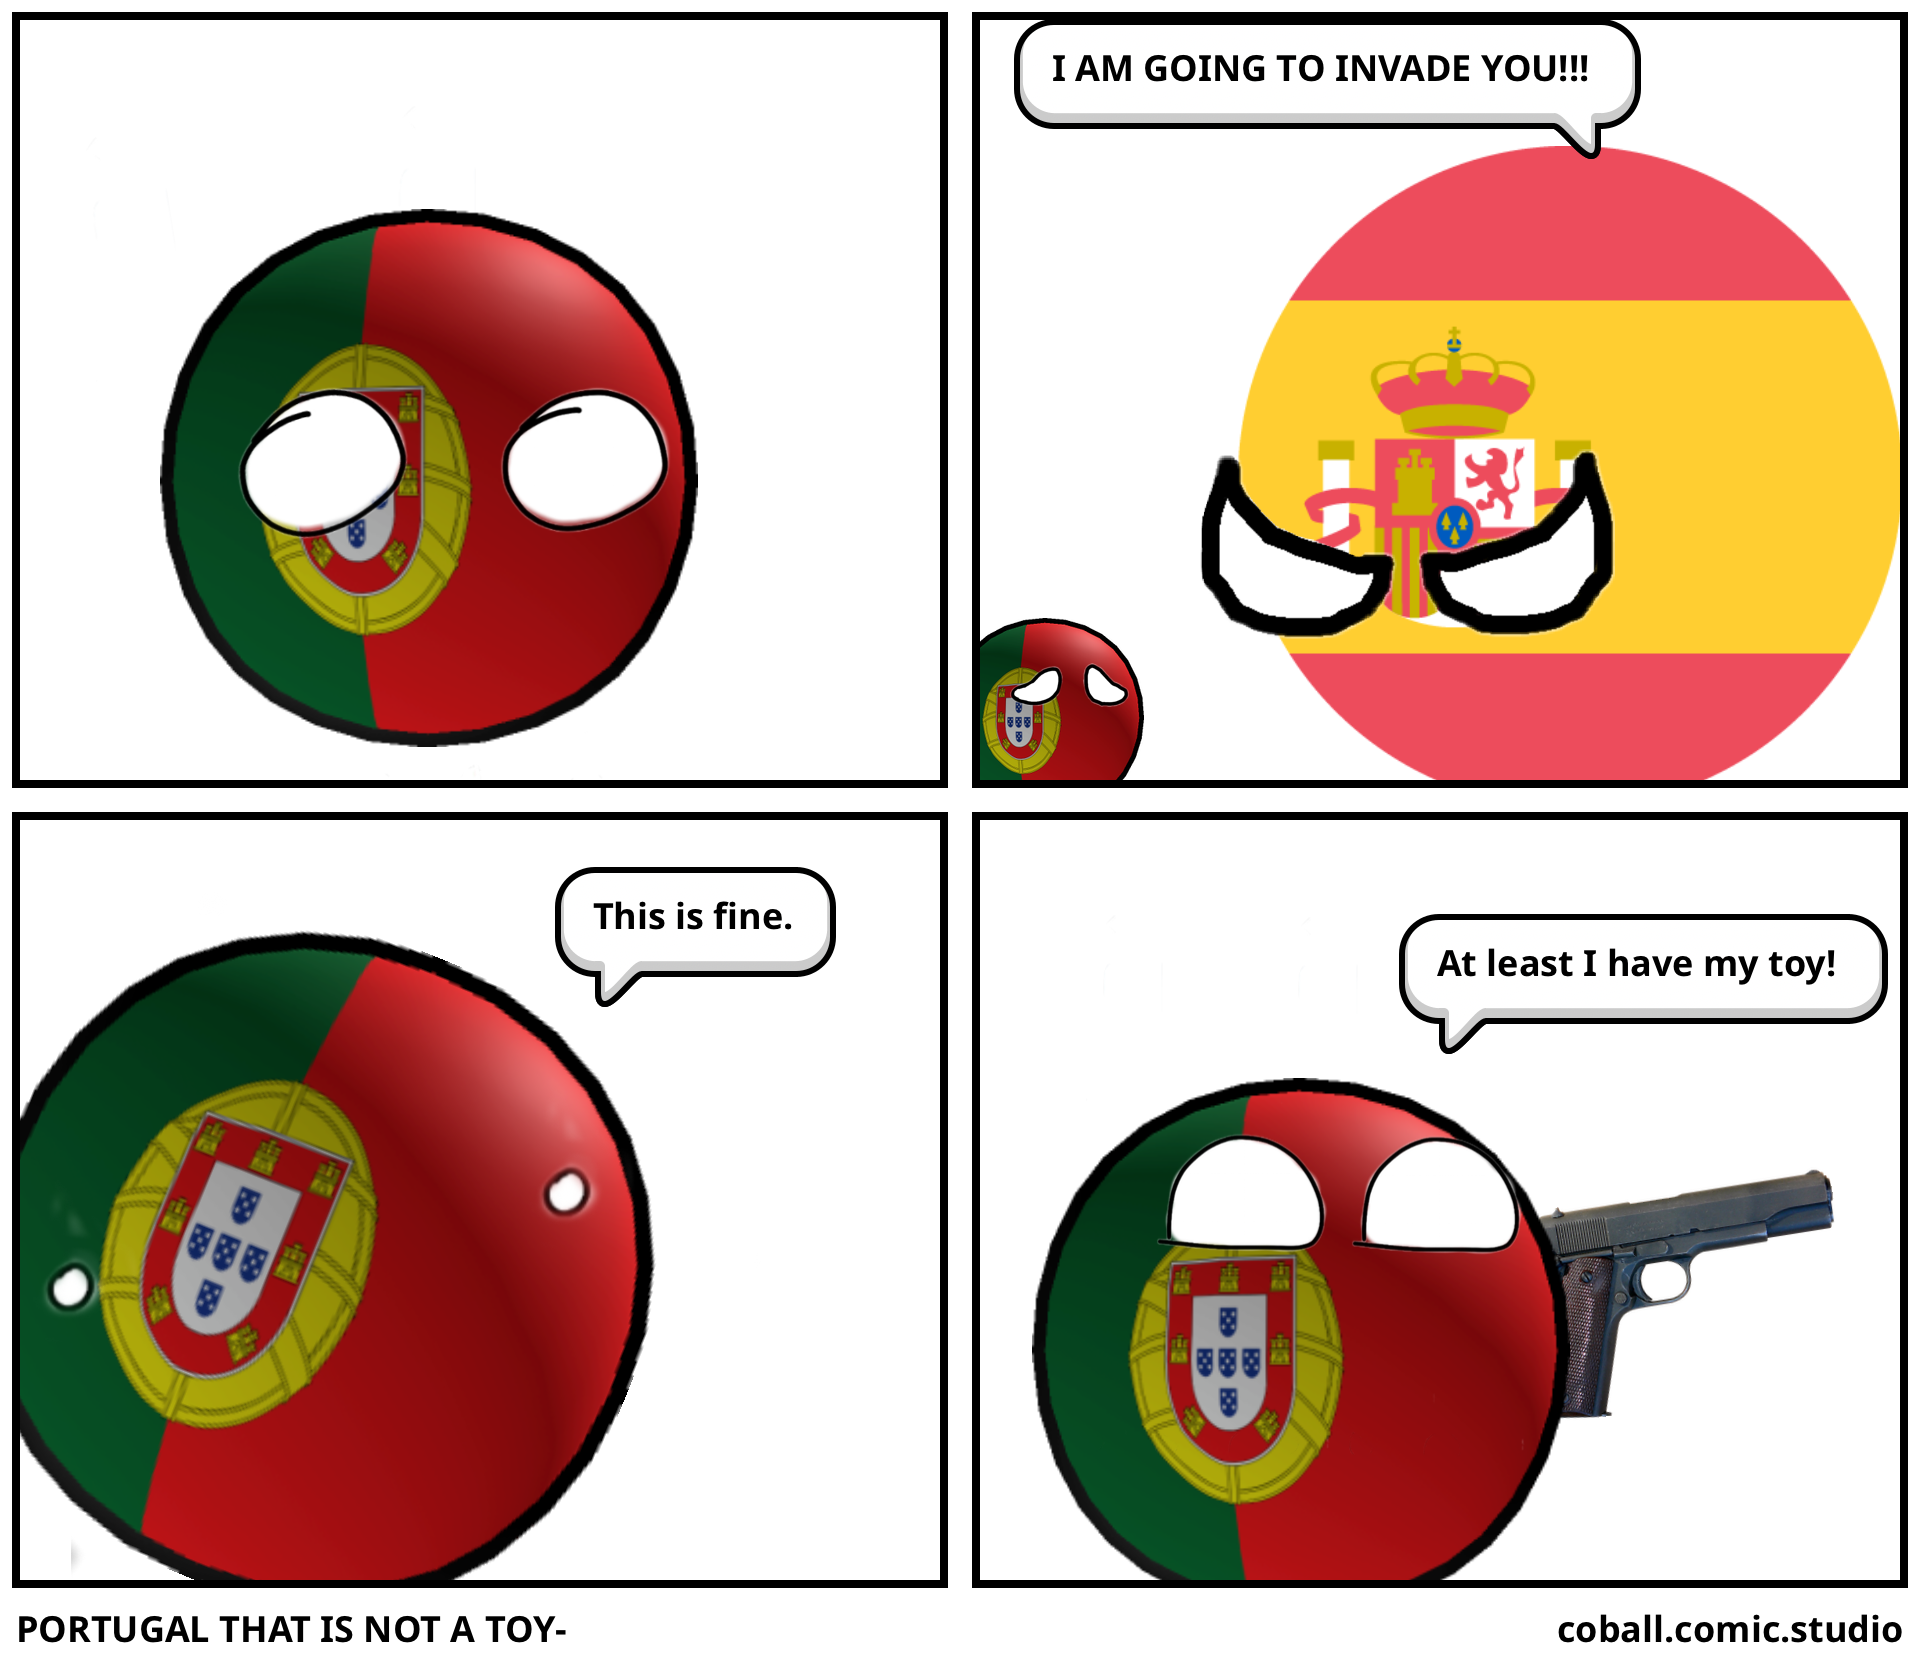 PORTUGAL THAT IS NOT A TOY-